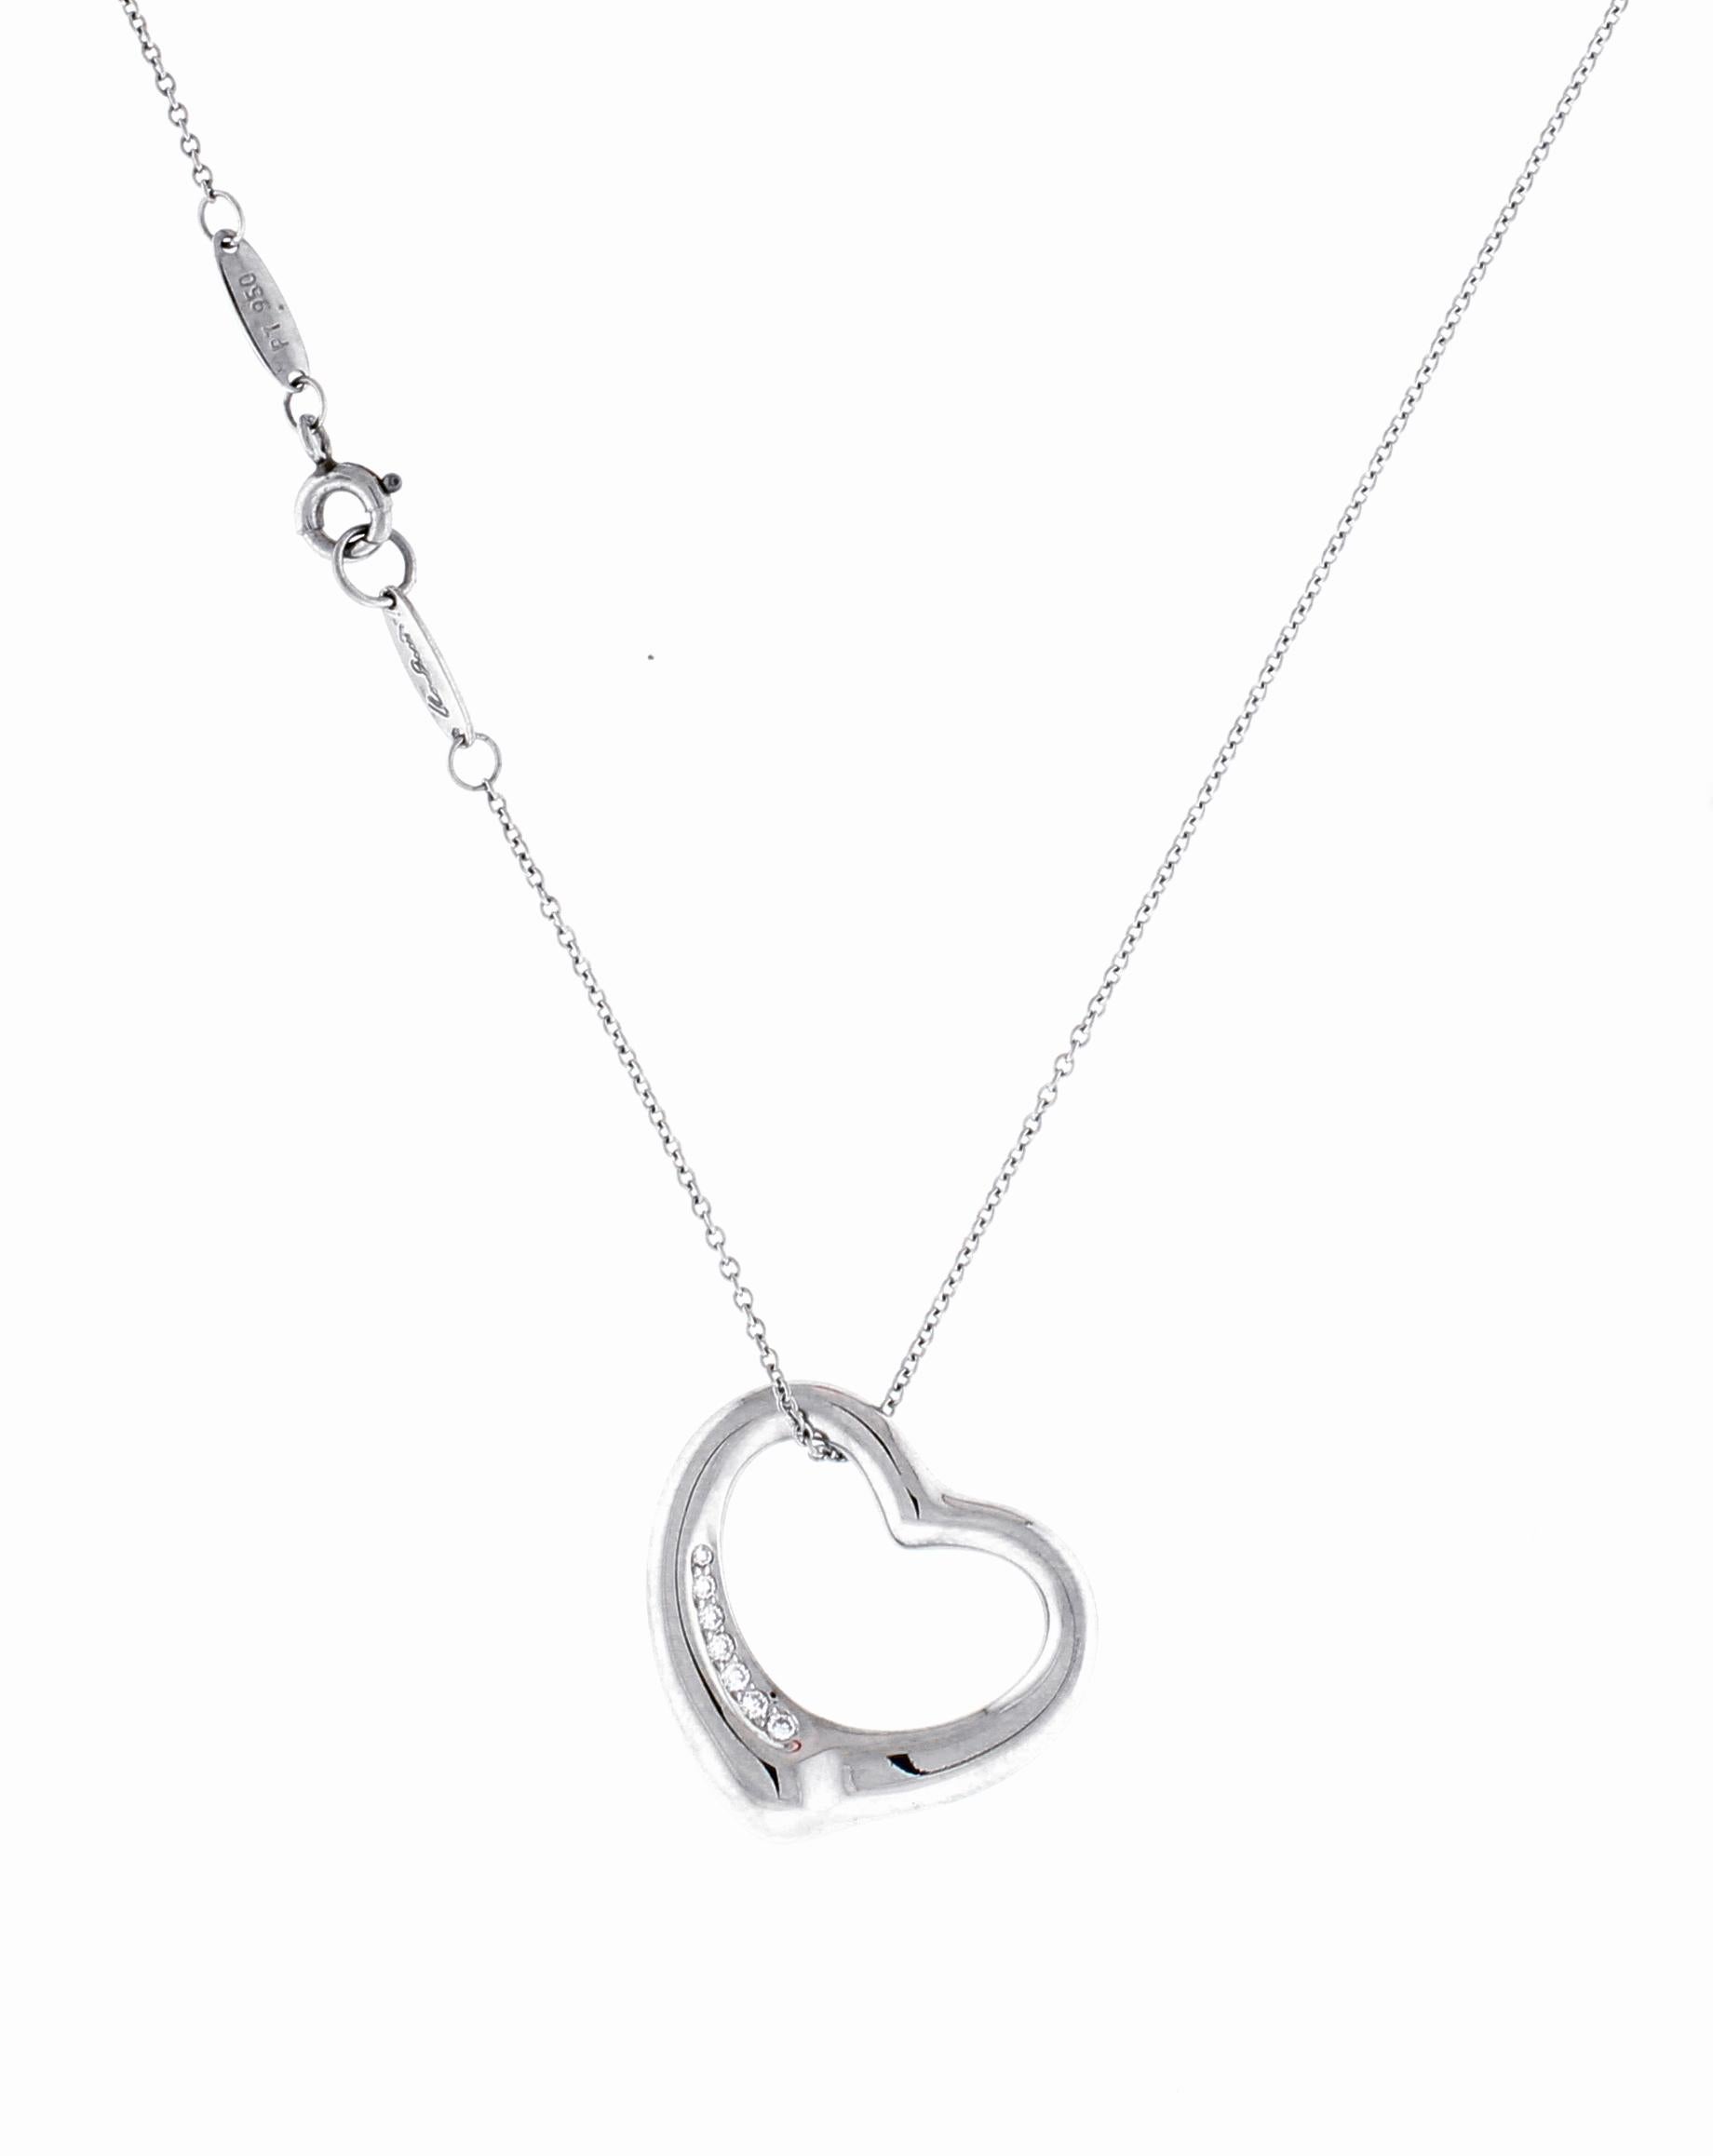 From Elsa Peretti for Tiffany & Co her iconic open heart  pendant necklace
♦ Designer: Elsa Peretti for Tiffany & Co
♦ Metal; Platinum
♦ 7 Diamonds=.30
♦ 7/8th of an inch across 
♦ Circa 1995
♦ 16 inch platinum chain
♦ Packaging: Pampillonia